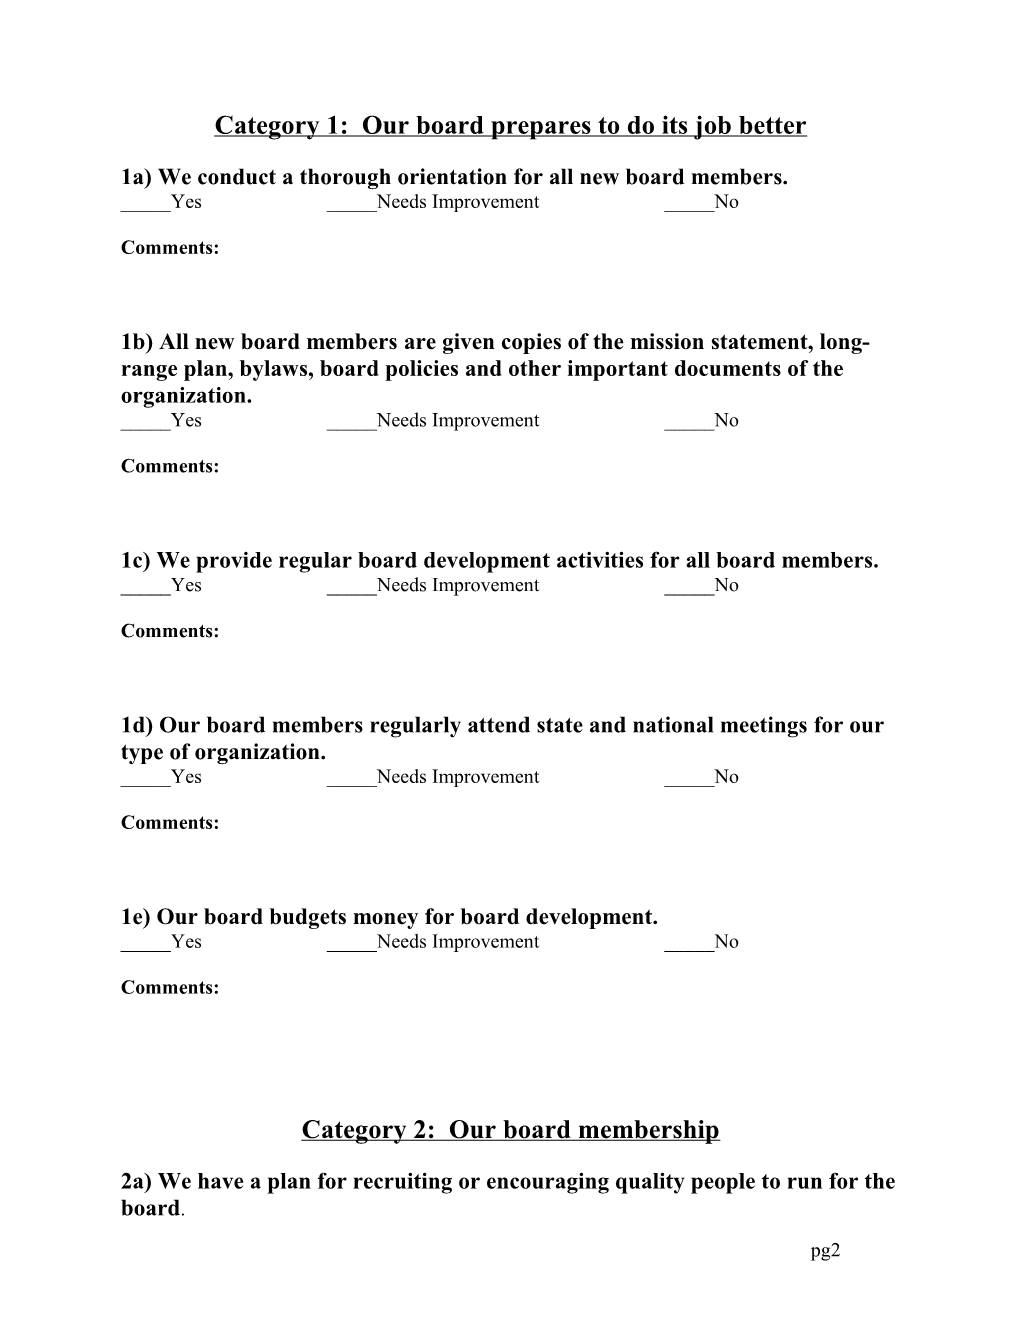 The Board Self-Evaluation Instrument